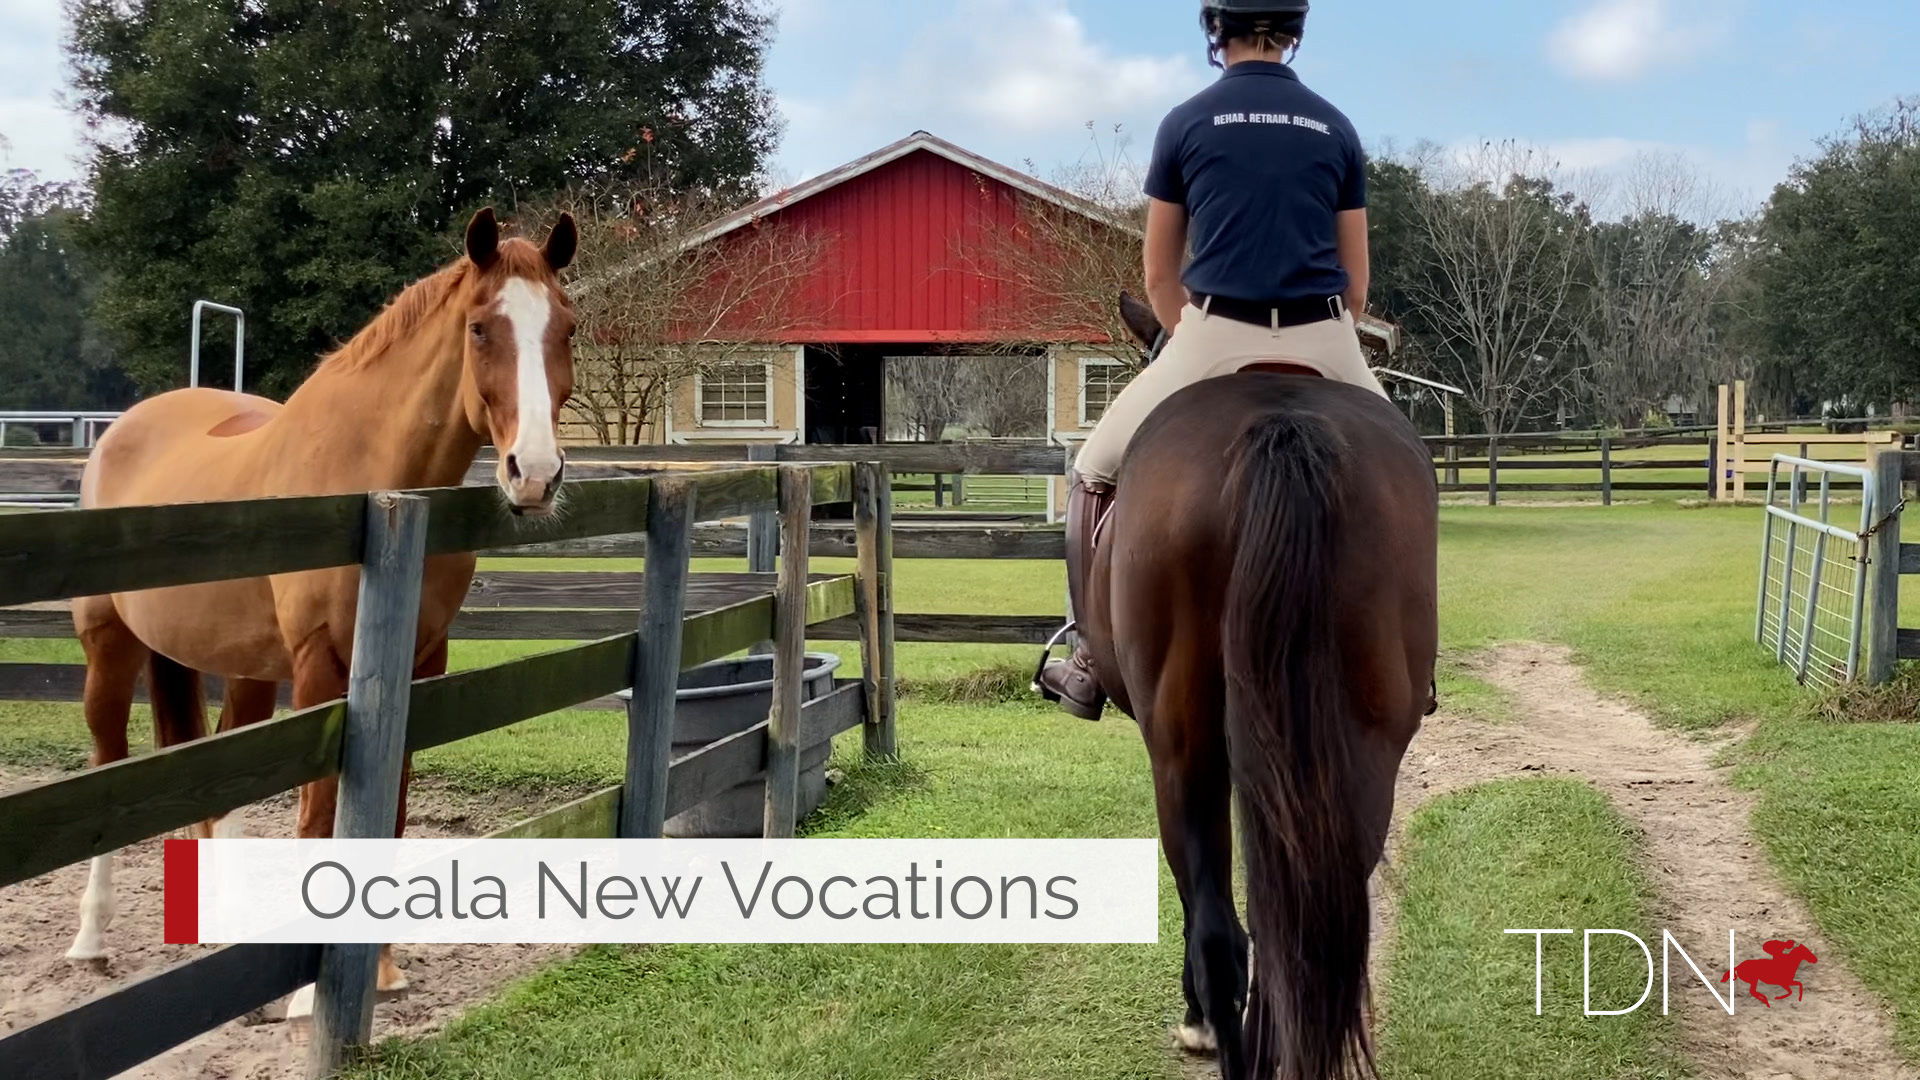 New Vocations Launches Florida Facility